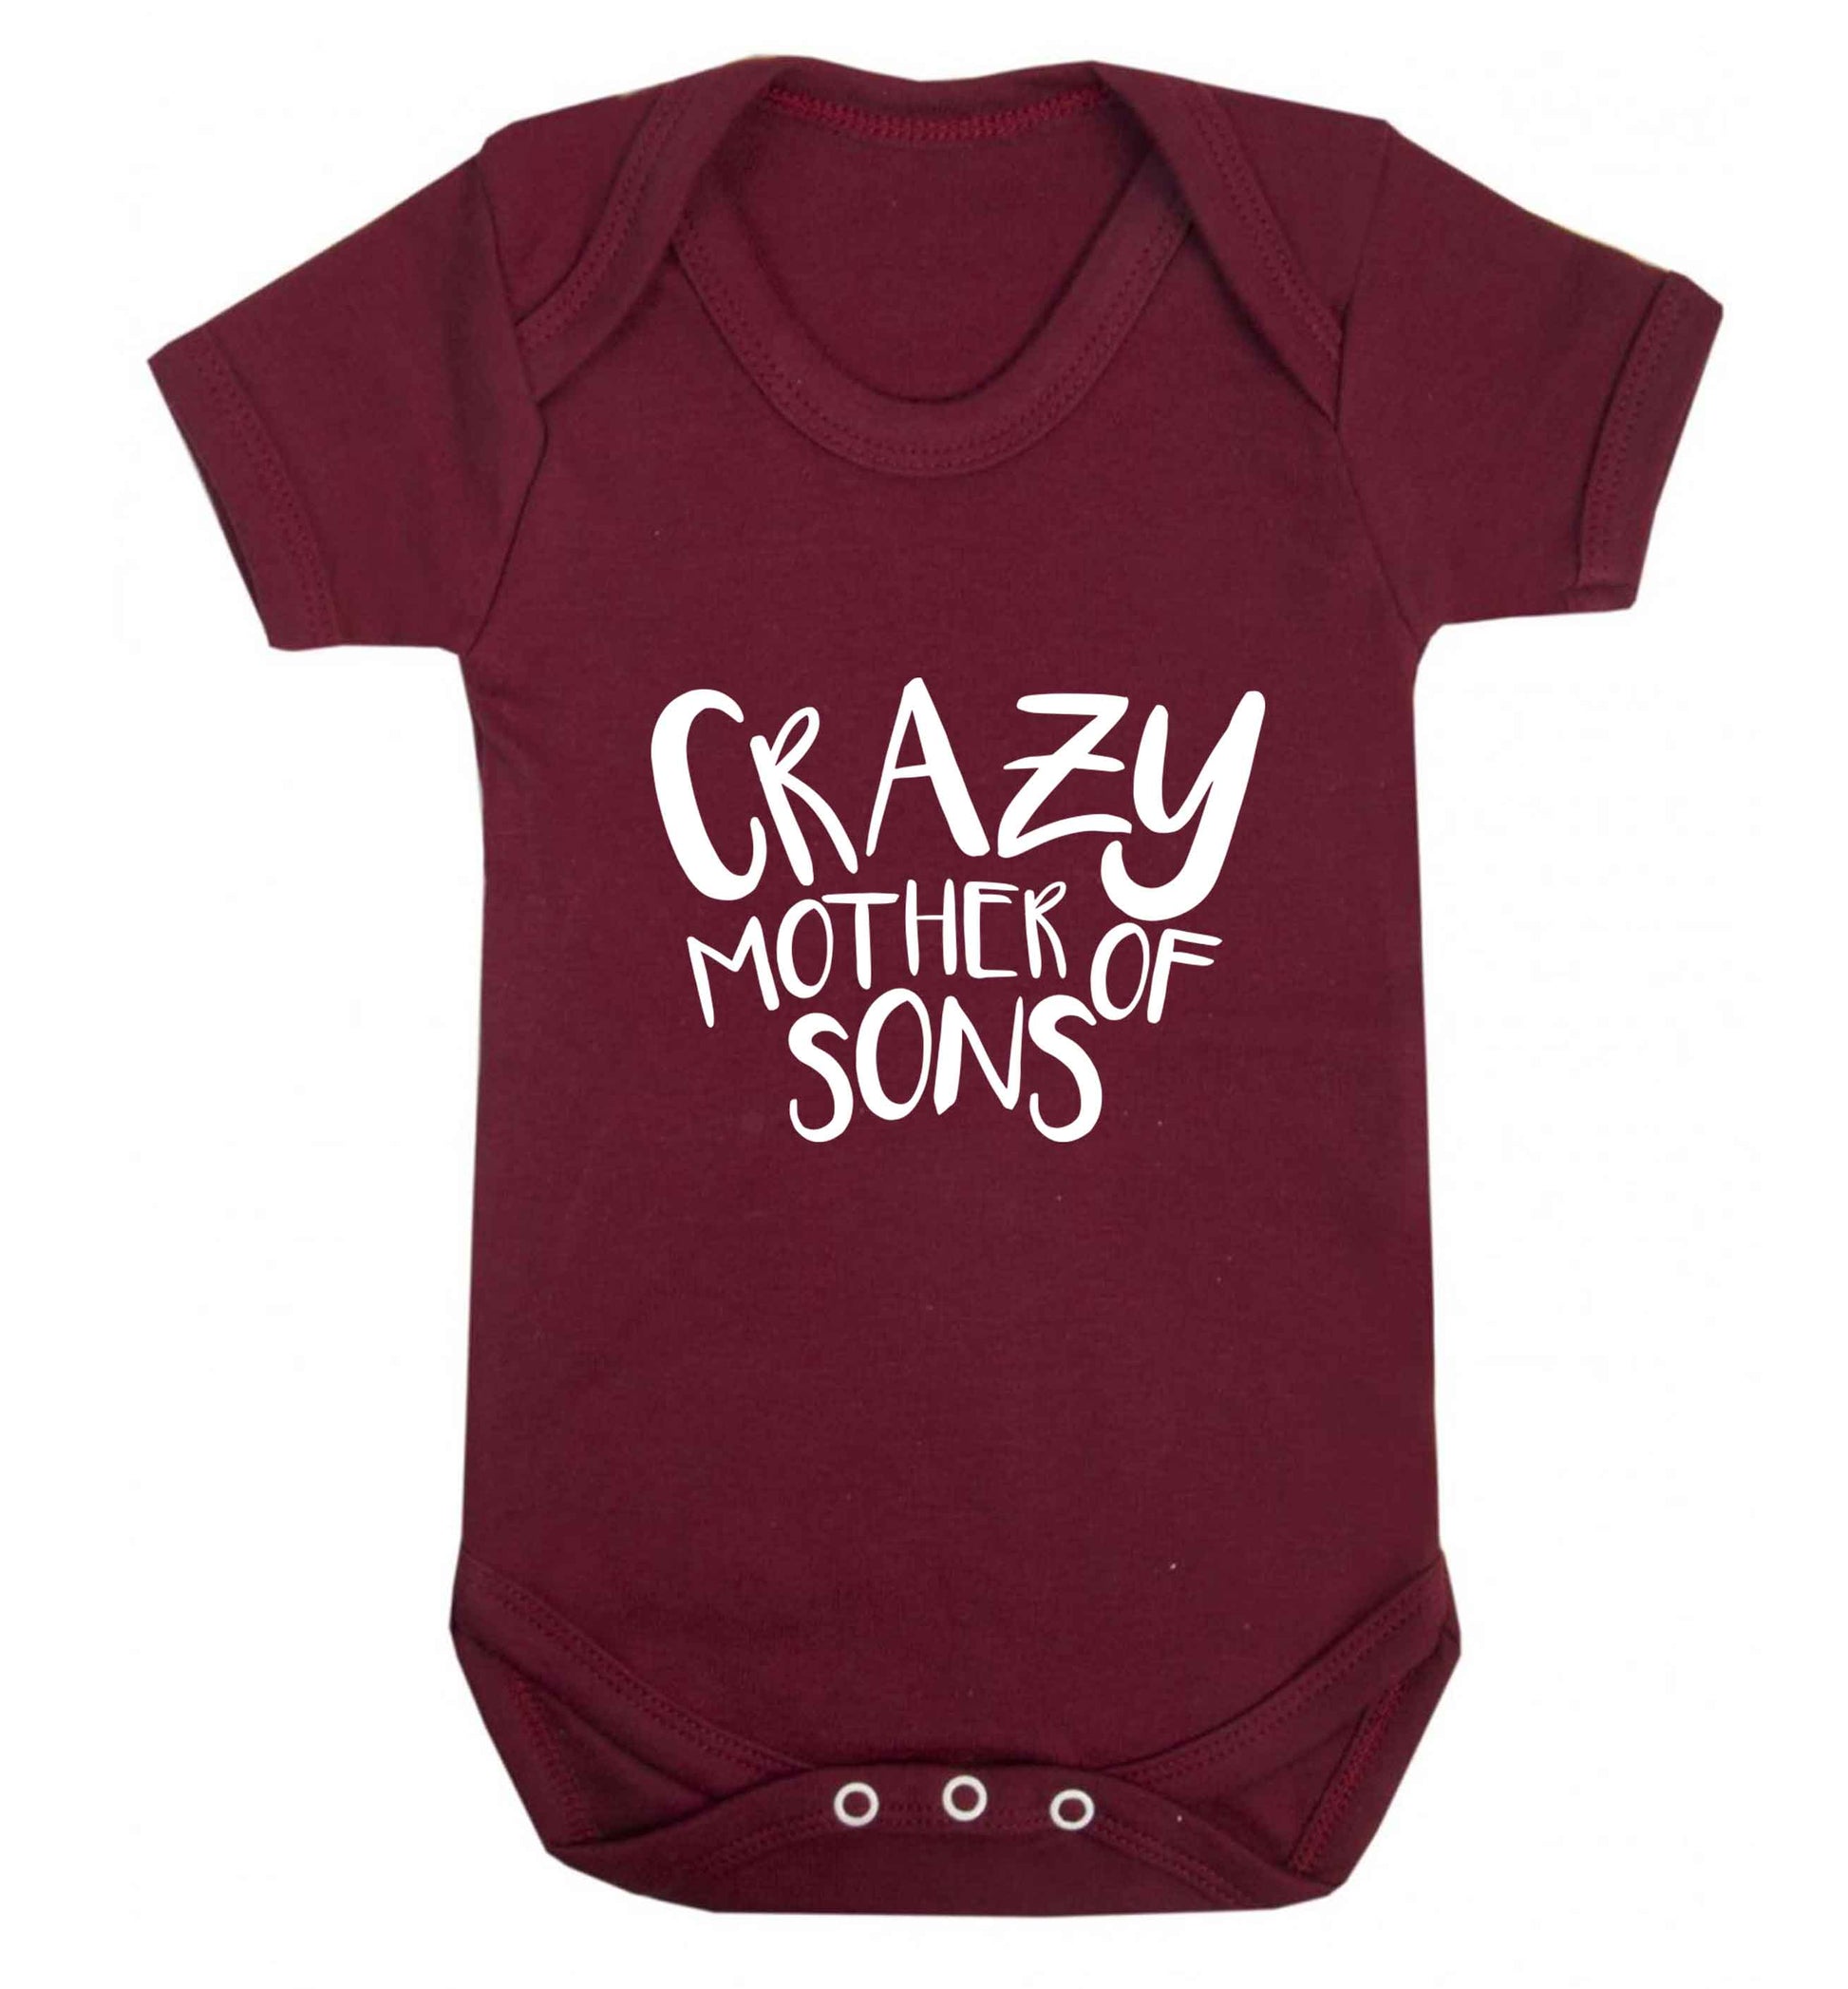 Crazy mother of sons baby vest maroon 18-24 months